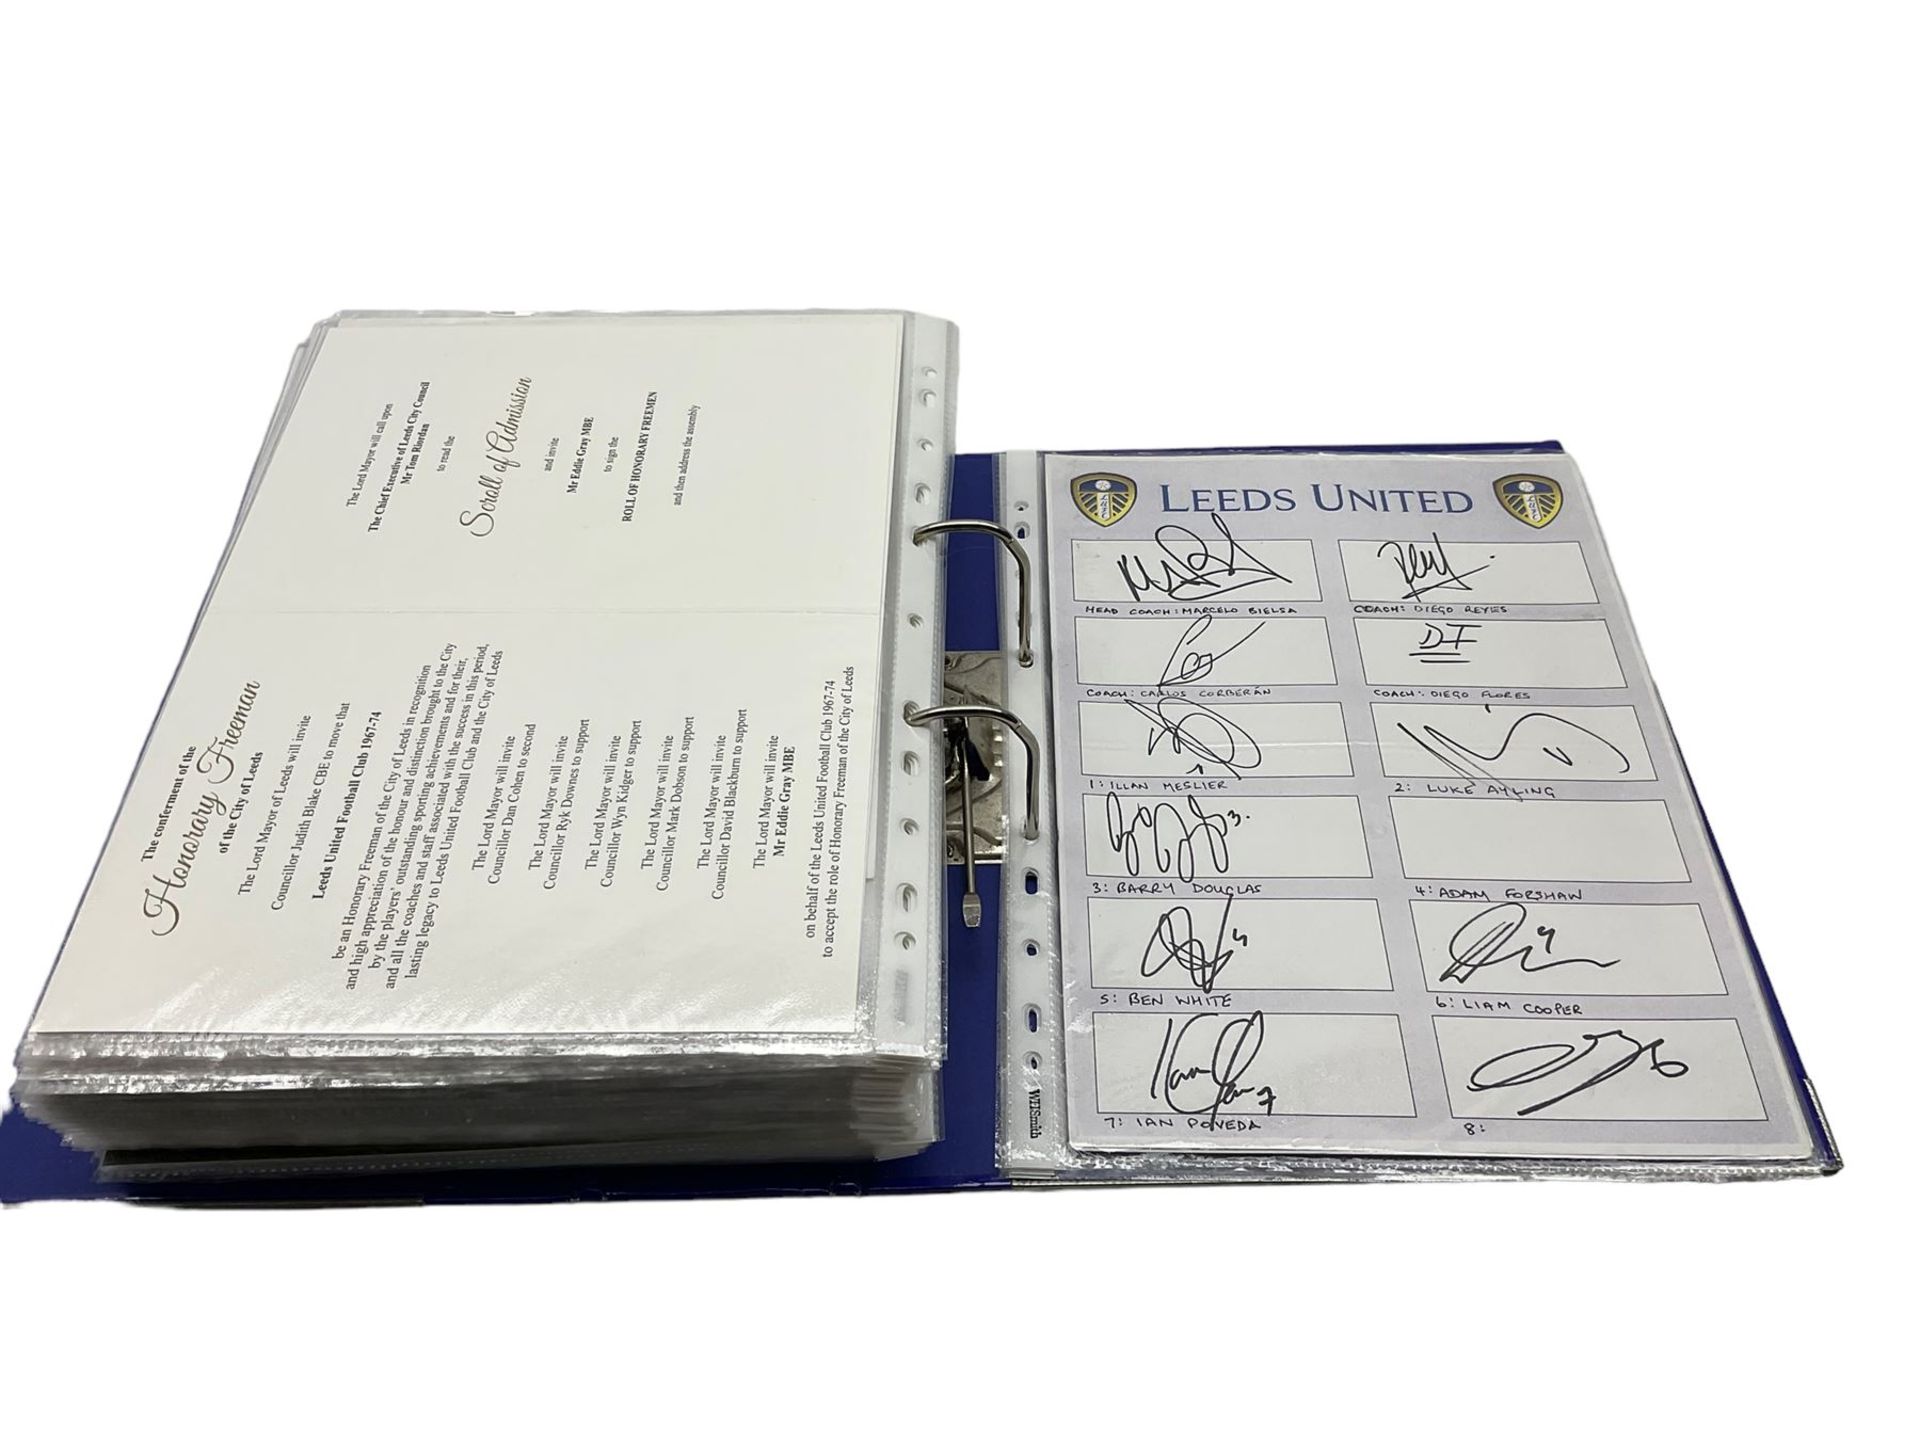 Leeds United football club - various autographs and signatures including Kalvin Philips - Image 8 of 10